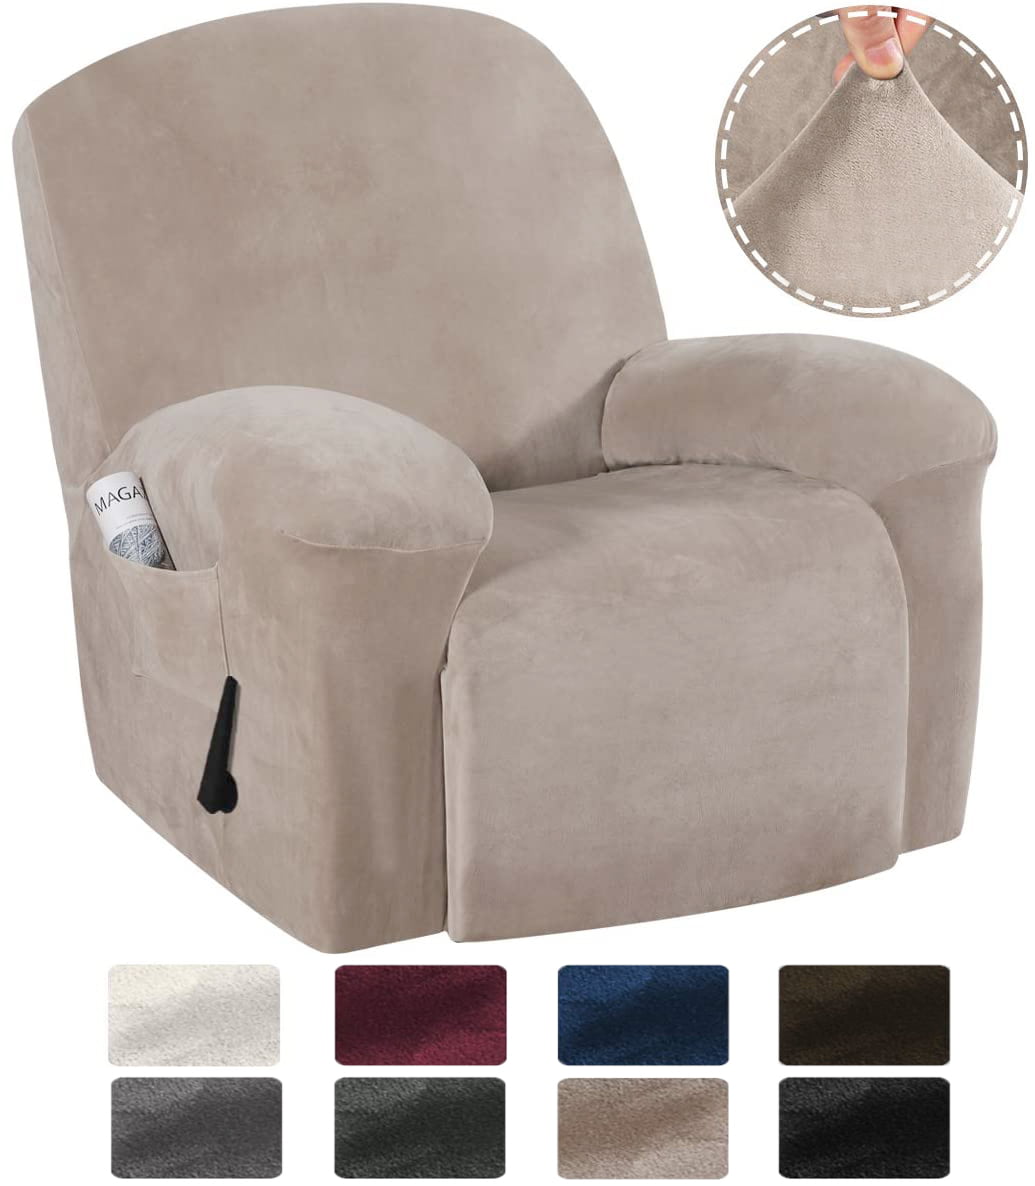 Recliner Chair Cover with Side Pocket,09 Recliner Slipcovers Furniture Protector Leather Recliner Elastic Bottom 6 Piece Stretch Velvet Plush Loveseat Recliner Cover Recliner Sofa Cover